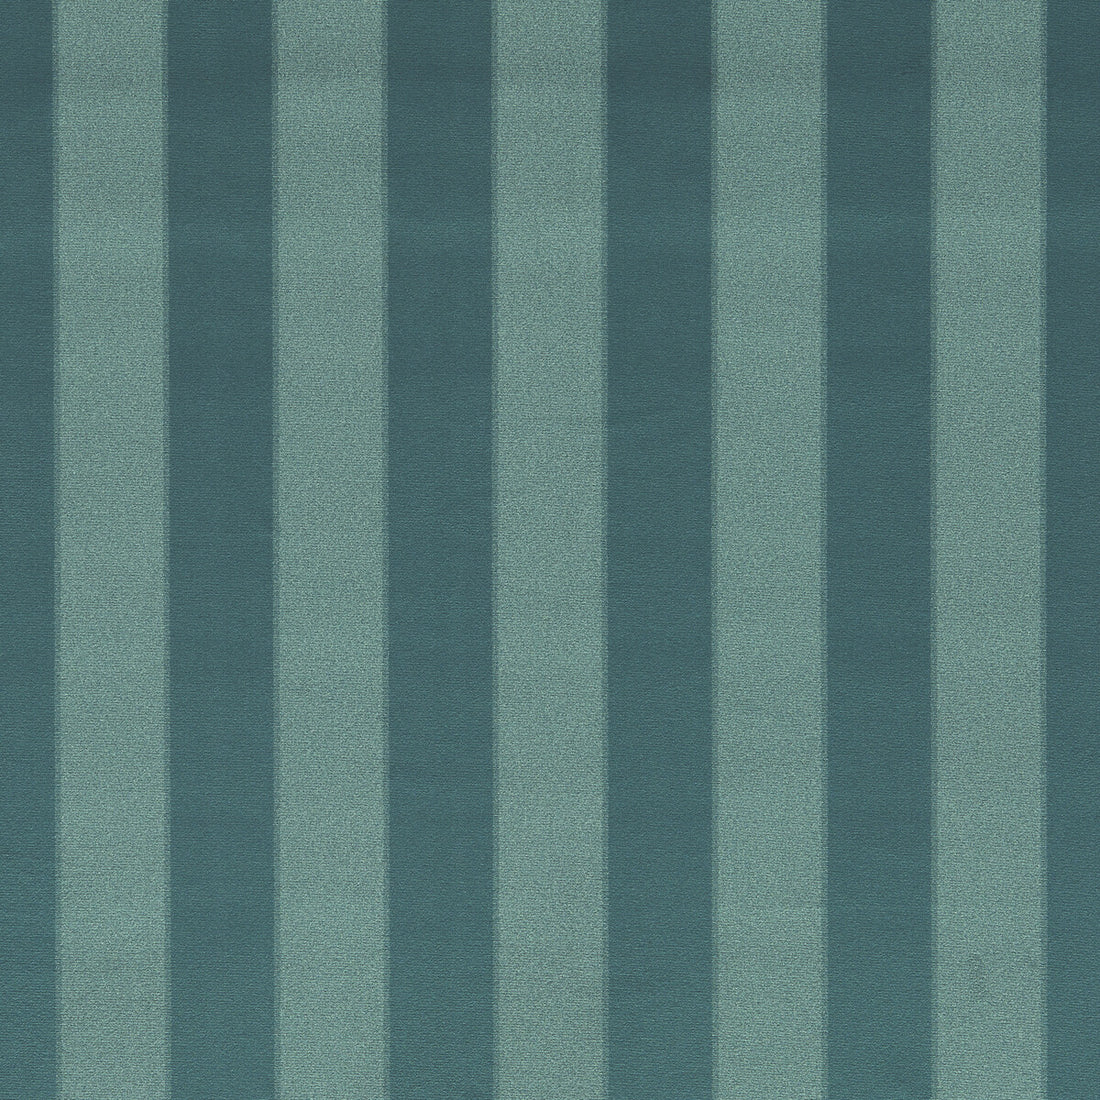 Haldon fabric in teal color - pattern F1690/07.CAC.0 - by Clarke And Clarke in the Whitworth collection